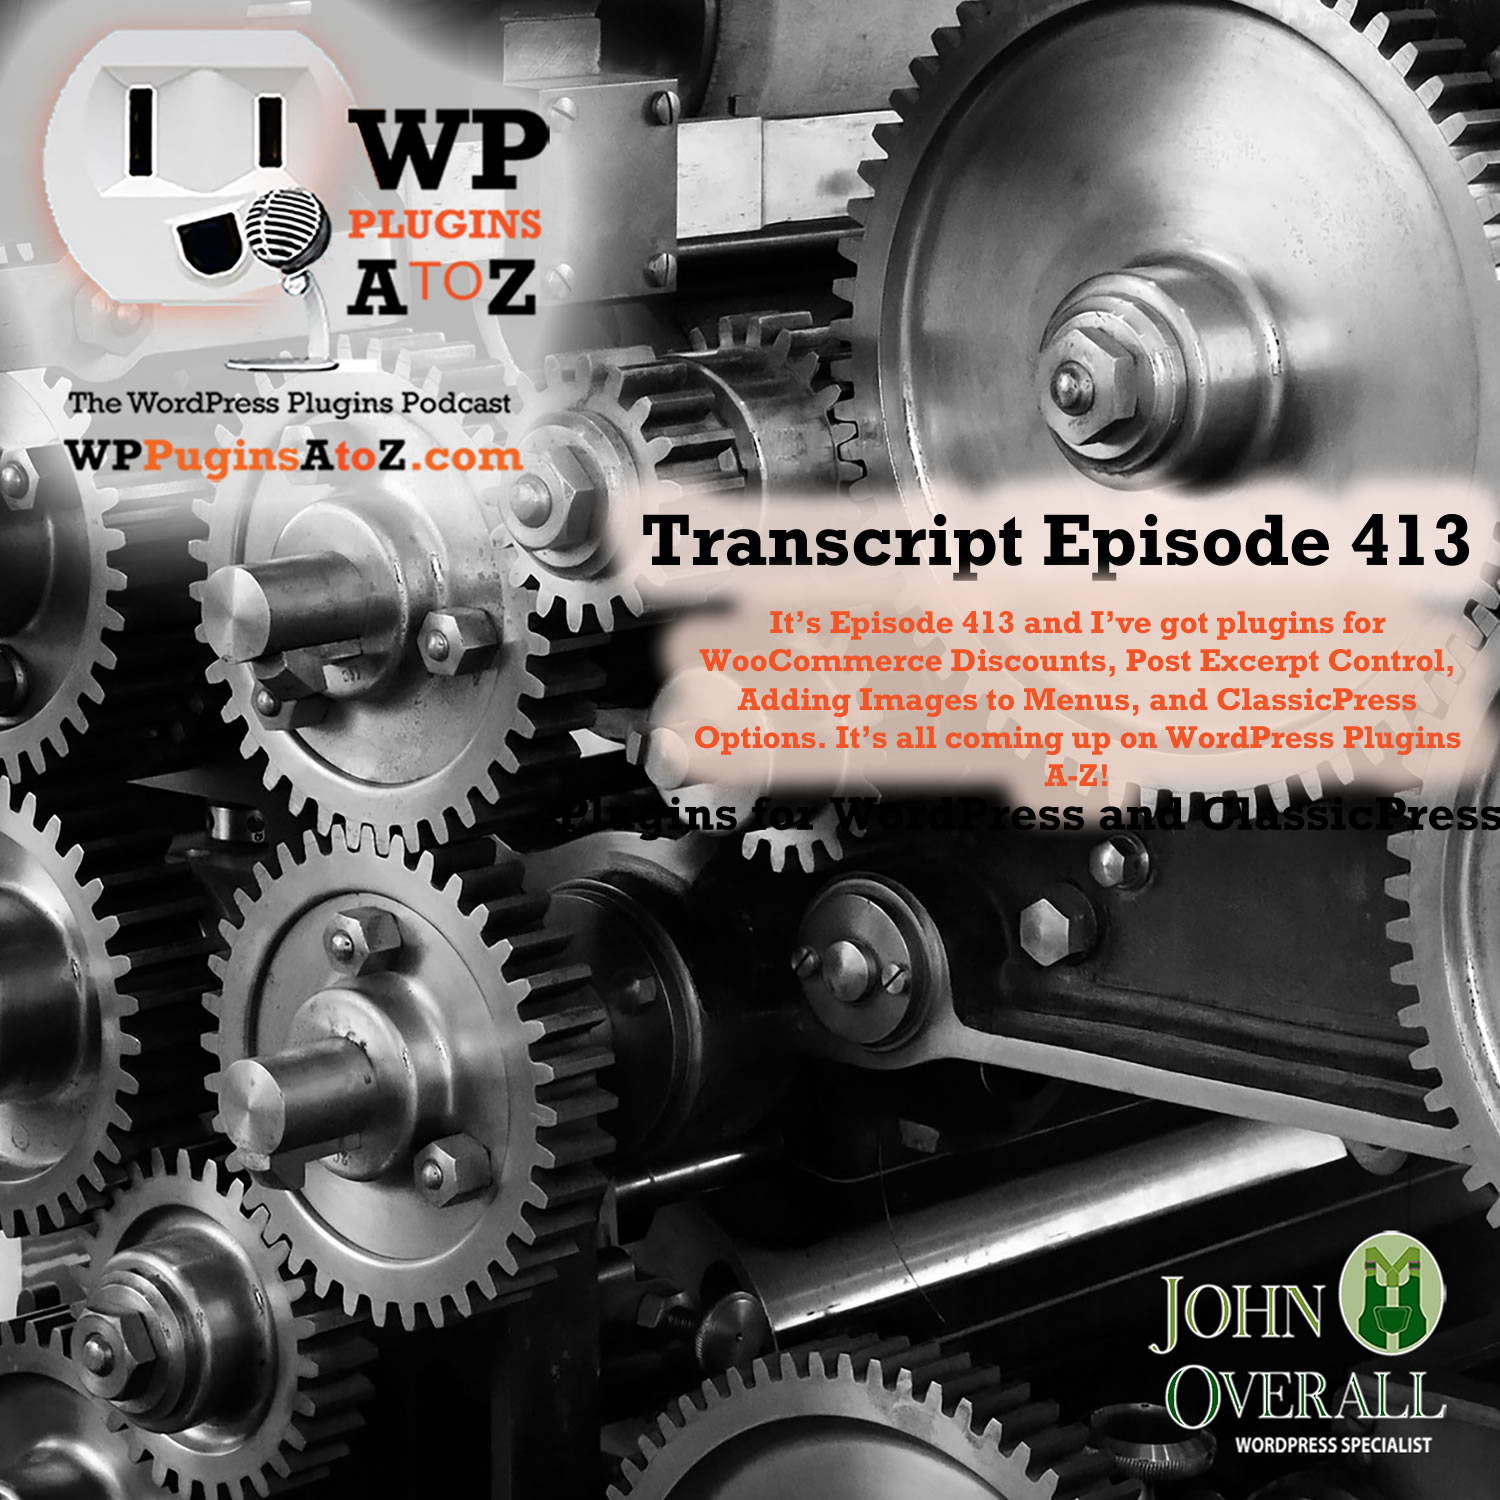 It's Episode 413 and I've got plugins for WooCommerce Discounts, Post Excerpt Control, Adding Images to Menus, and ClassicPress Options. It's all coming up on WordPress Plugins A-Z!